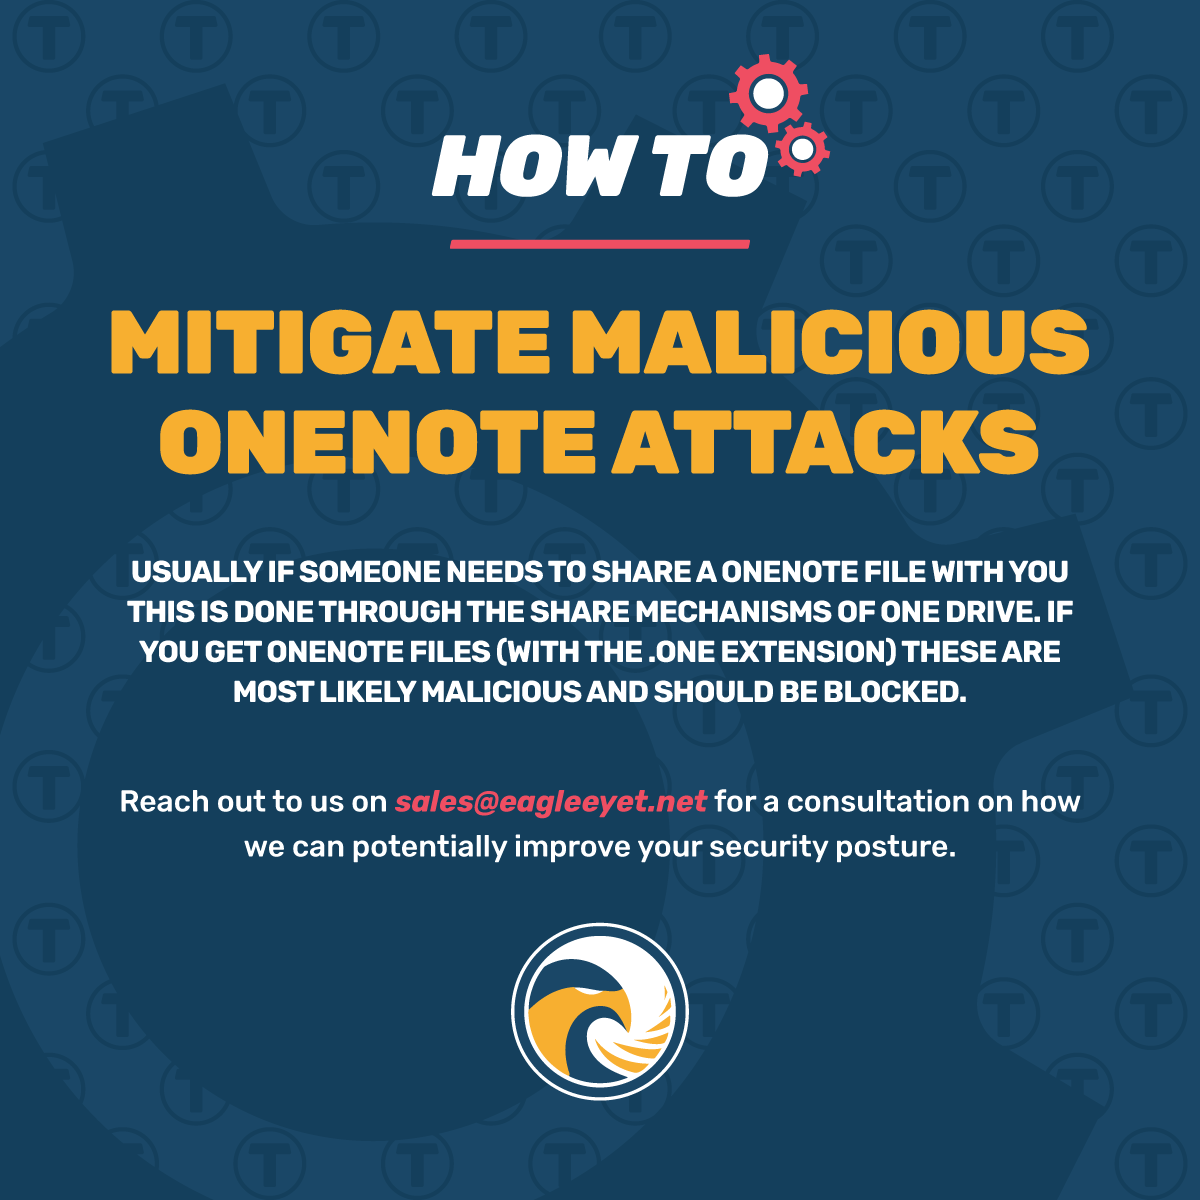 How to Mitigate Malicious OneNote Attacks and the Indicators of Compromise